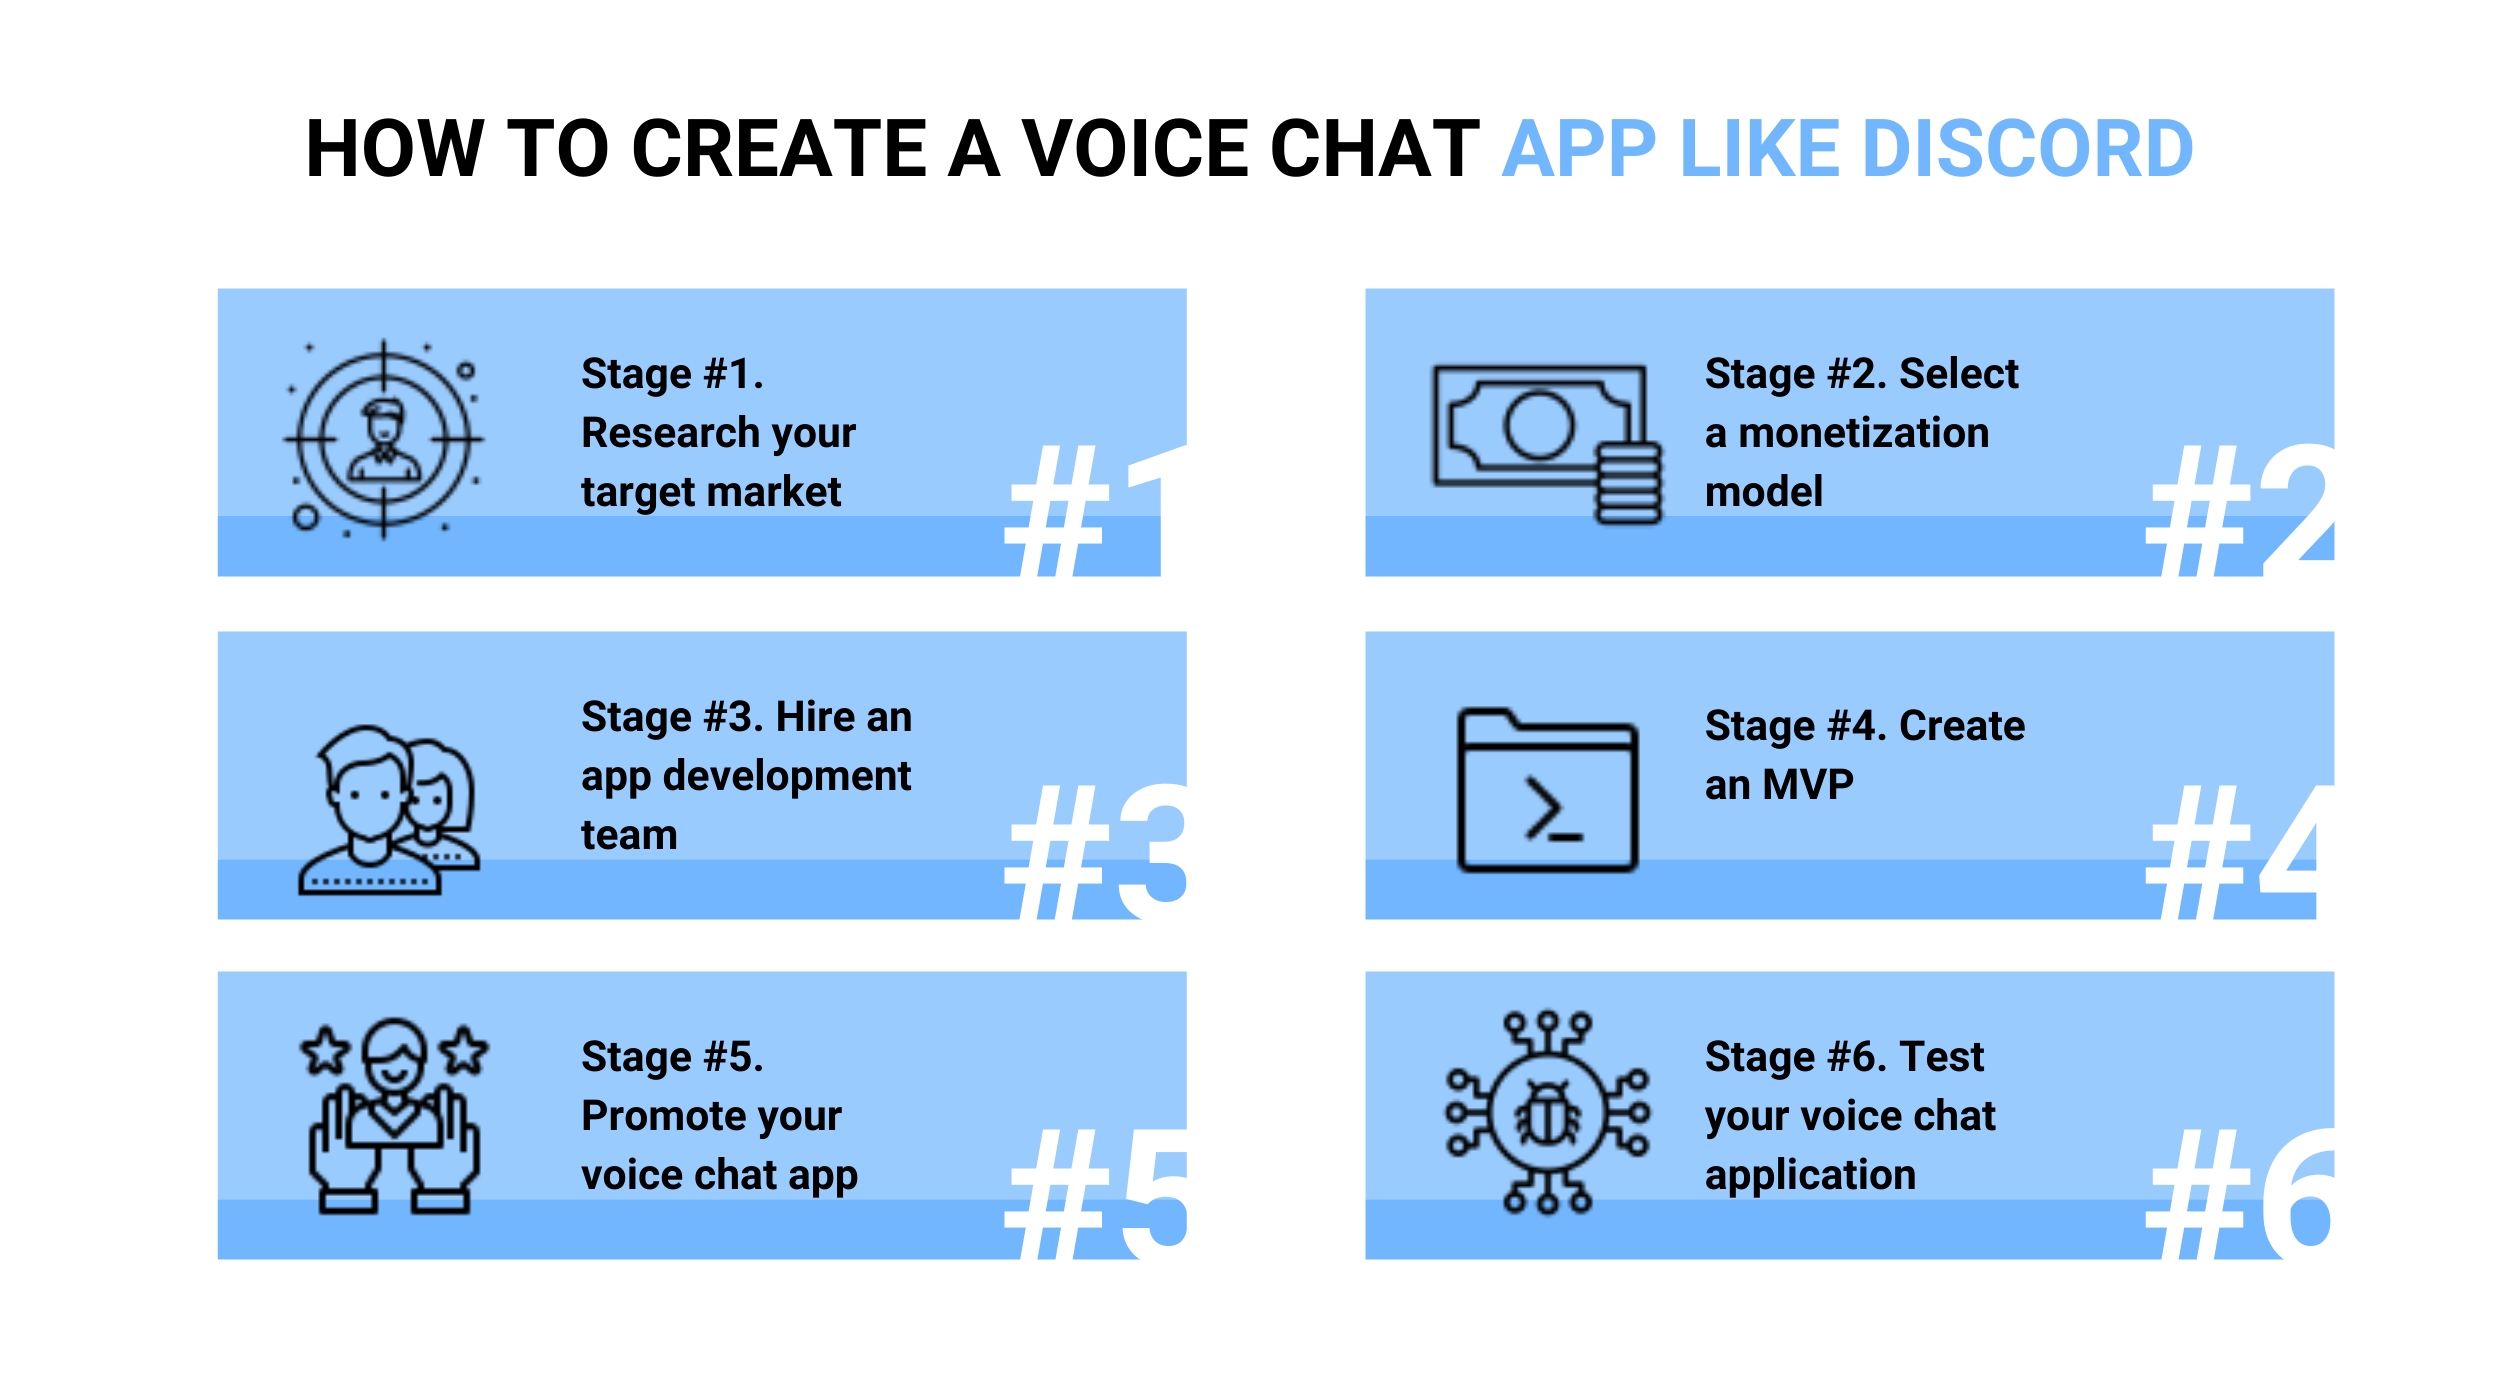 How to Create a Voice Chat App Like Discord: Main Steps